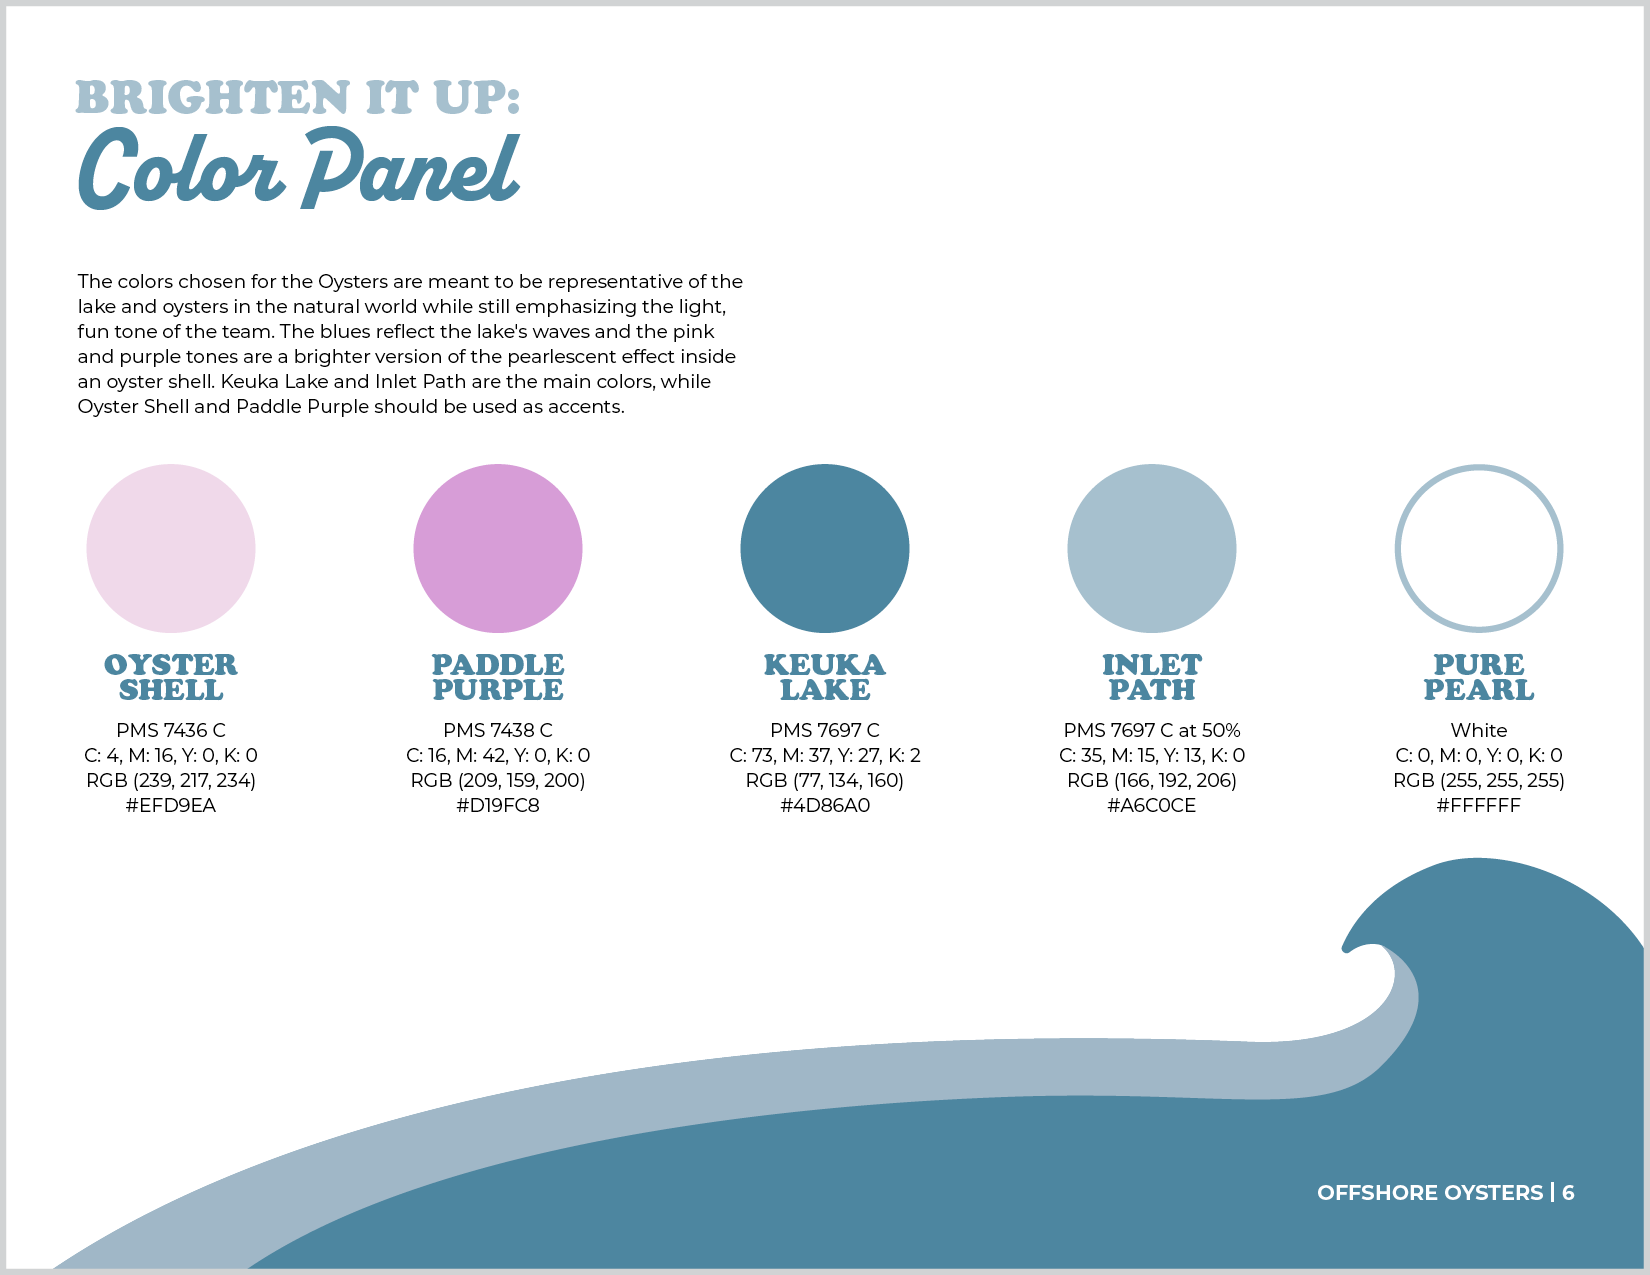 Offshore Oysters brand guideline color panel/color study.